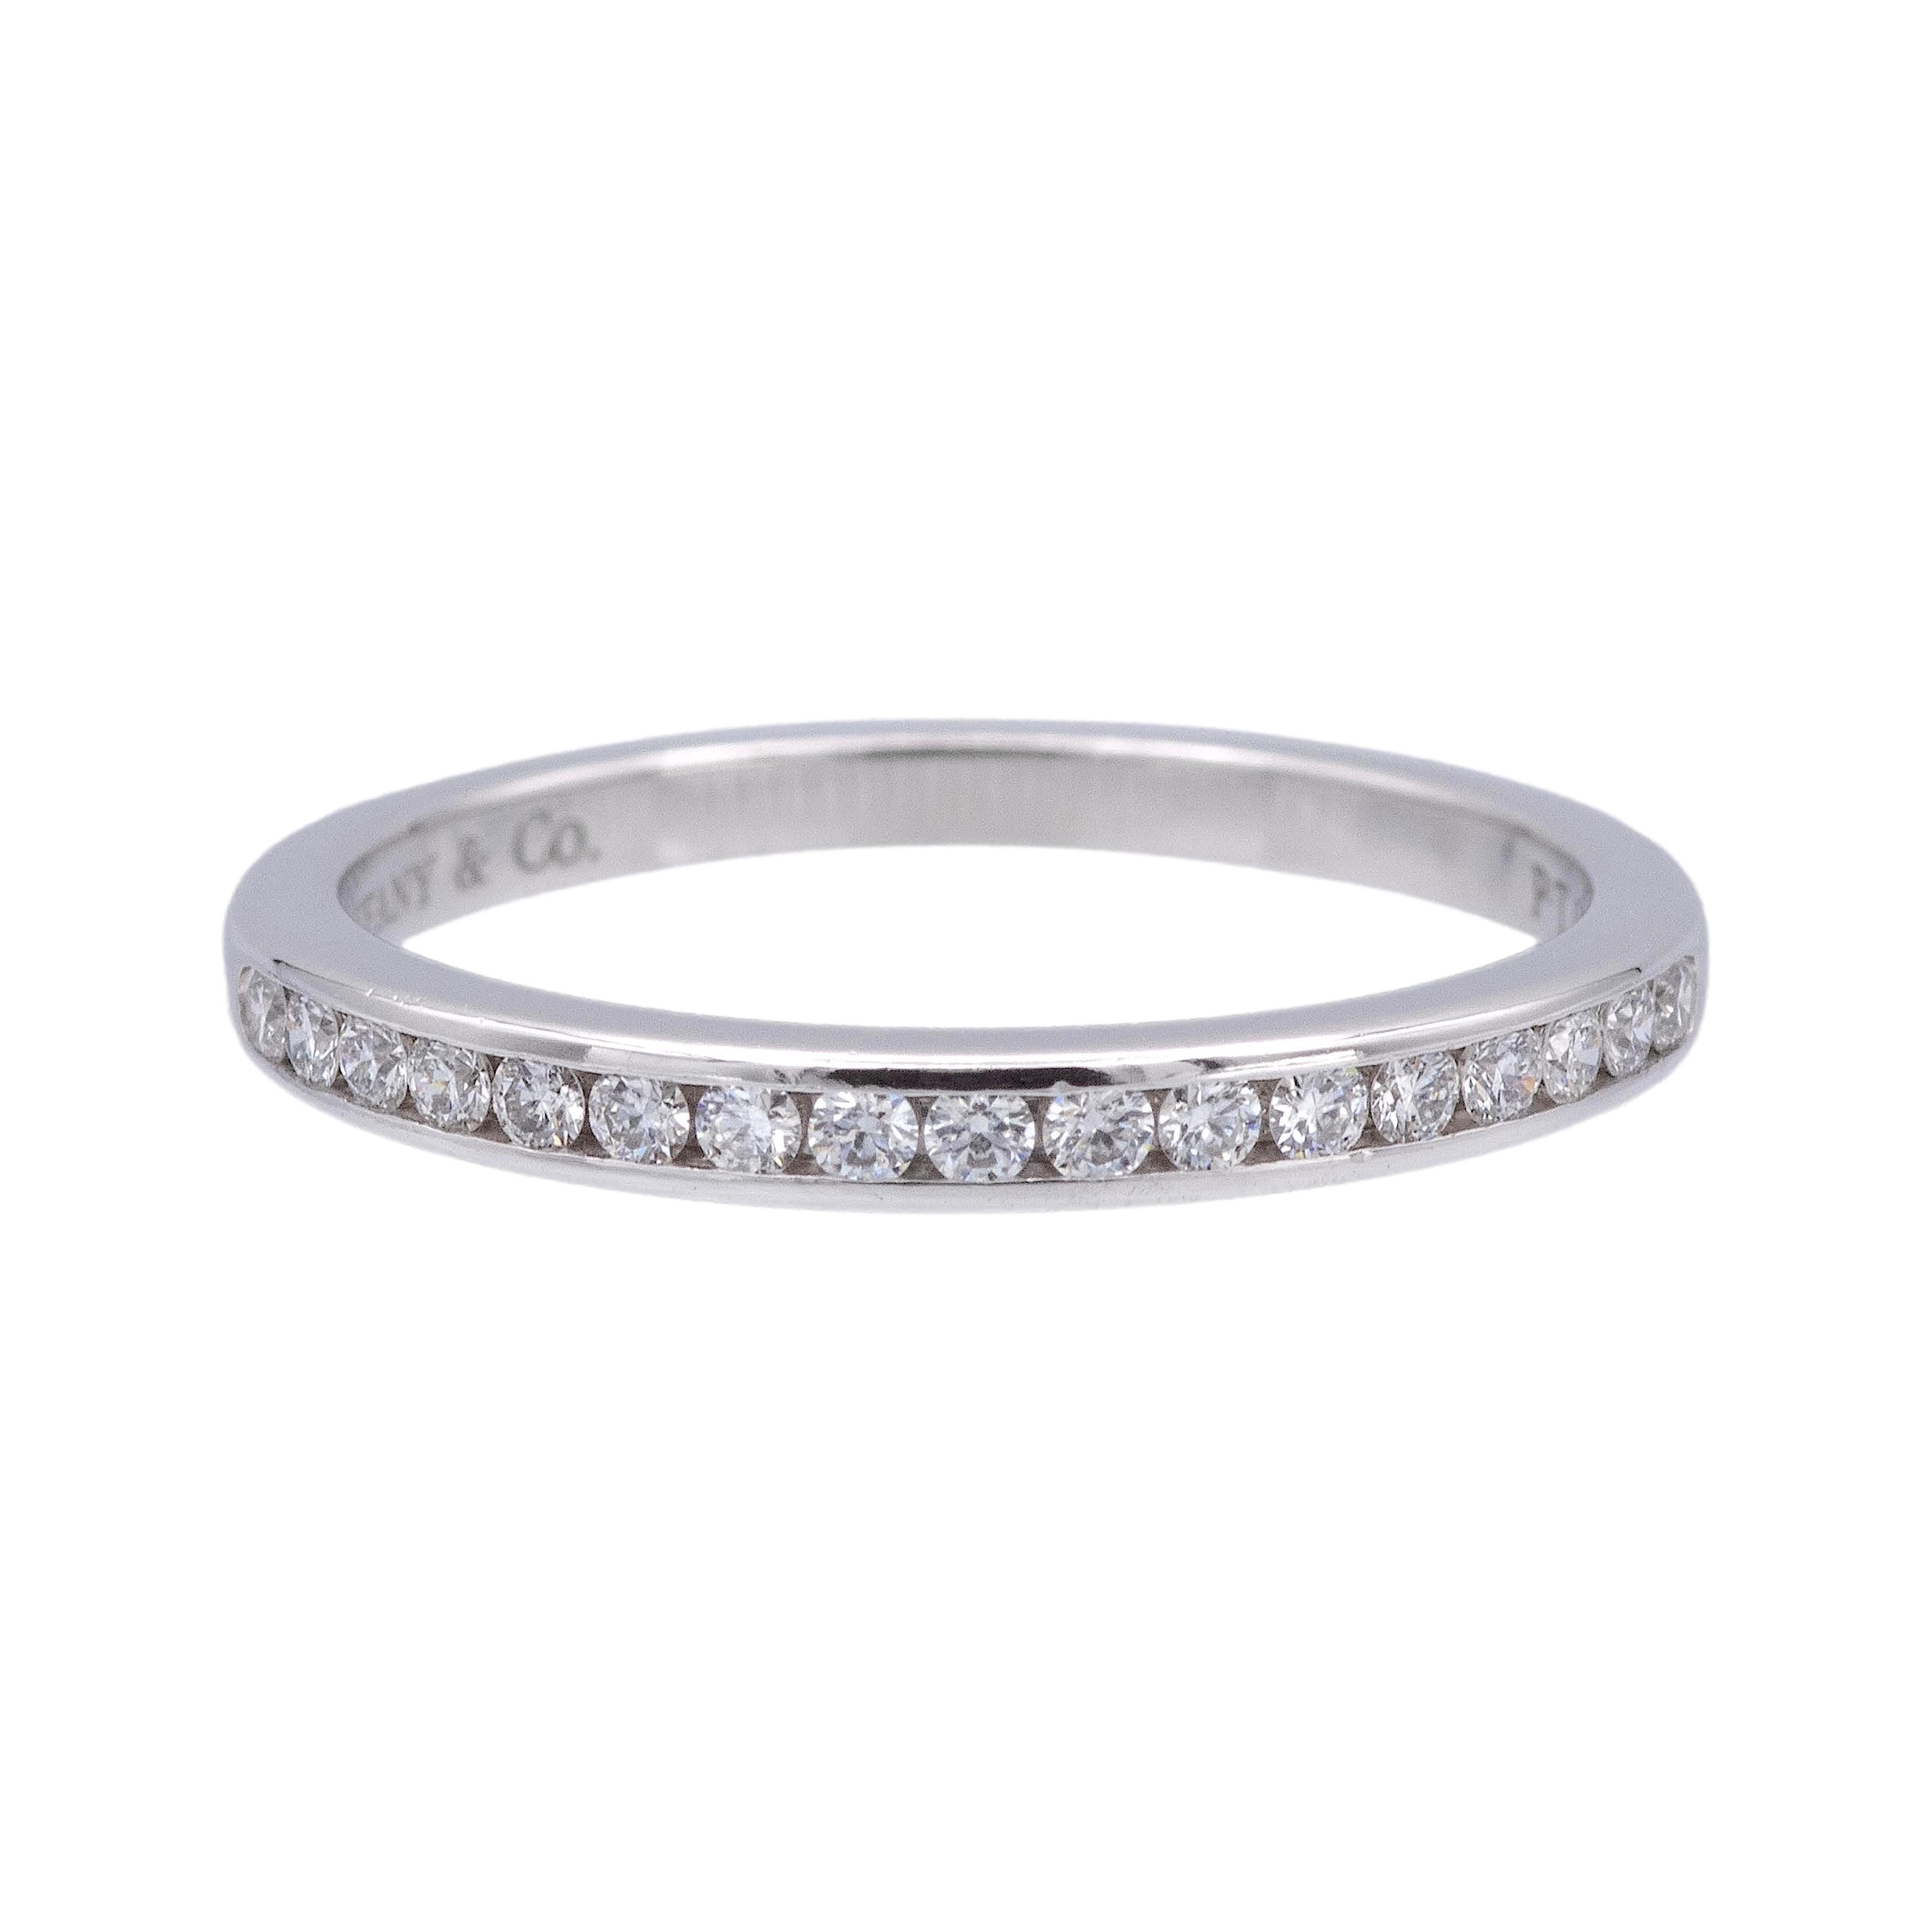 Tiffany & Co. half-circle wedding band ring from the Tiffany setting collection finely crafted in platinum featuring 17 round brilliant cut diamonds weighing 0.17 carats ranging D-G color, IF- VS2 clarity, measuring at 2 mm wide, Can be worn on its